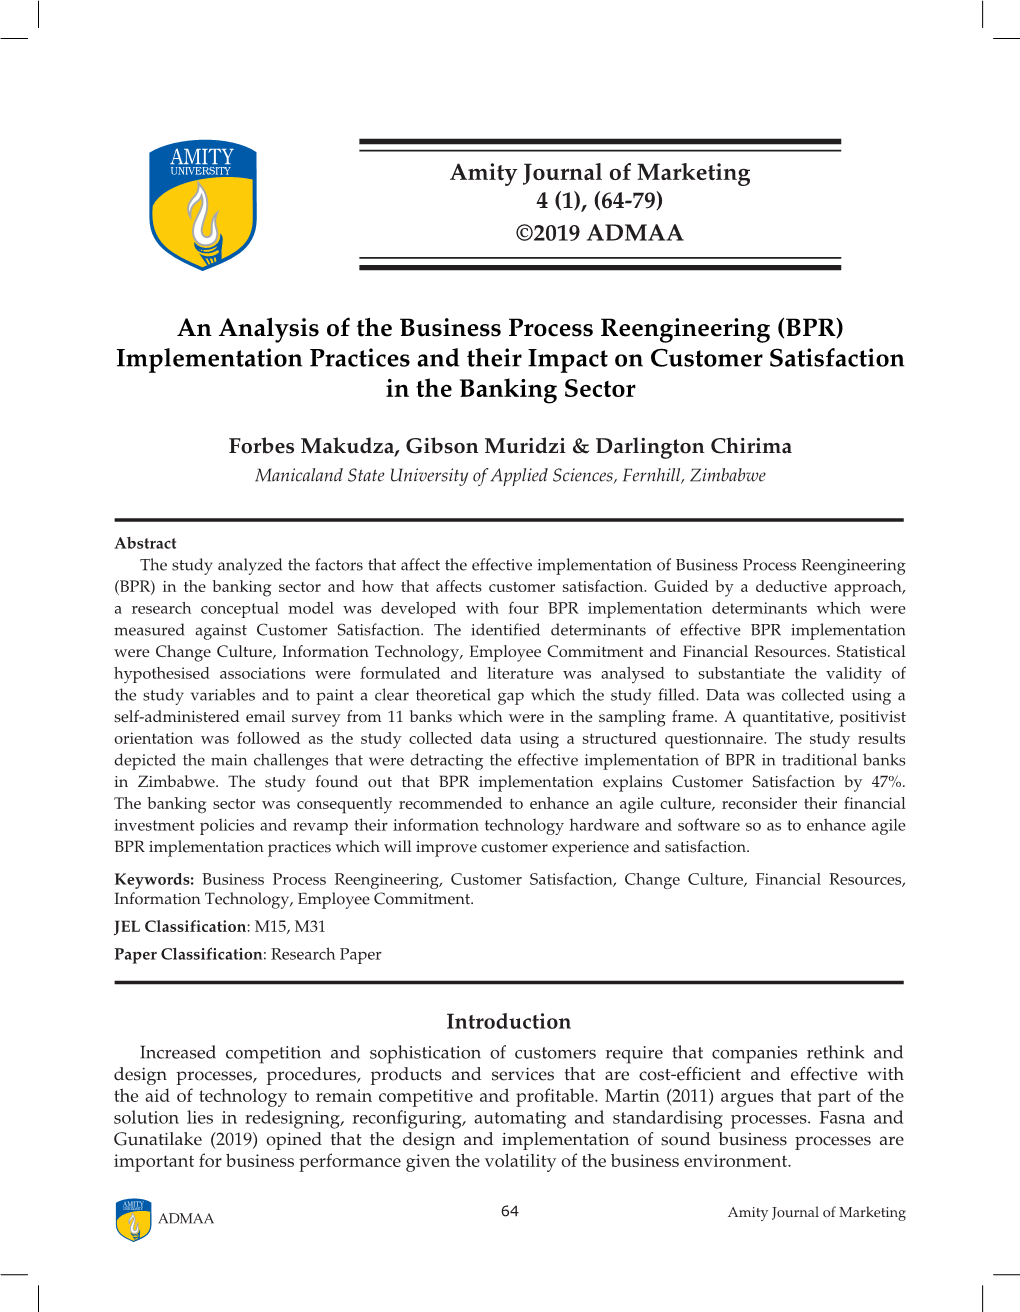 An Analysis of the Business Process Reengineering (BPR) Implementation Practices and Their Impact on Customer Satisfaction in the Banking Sector